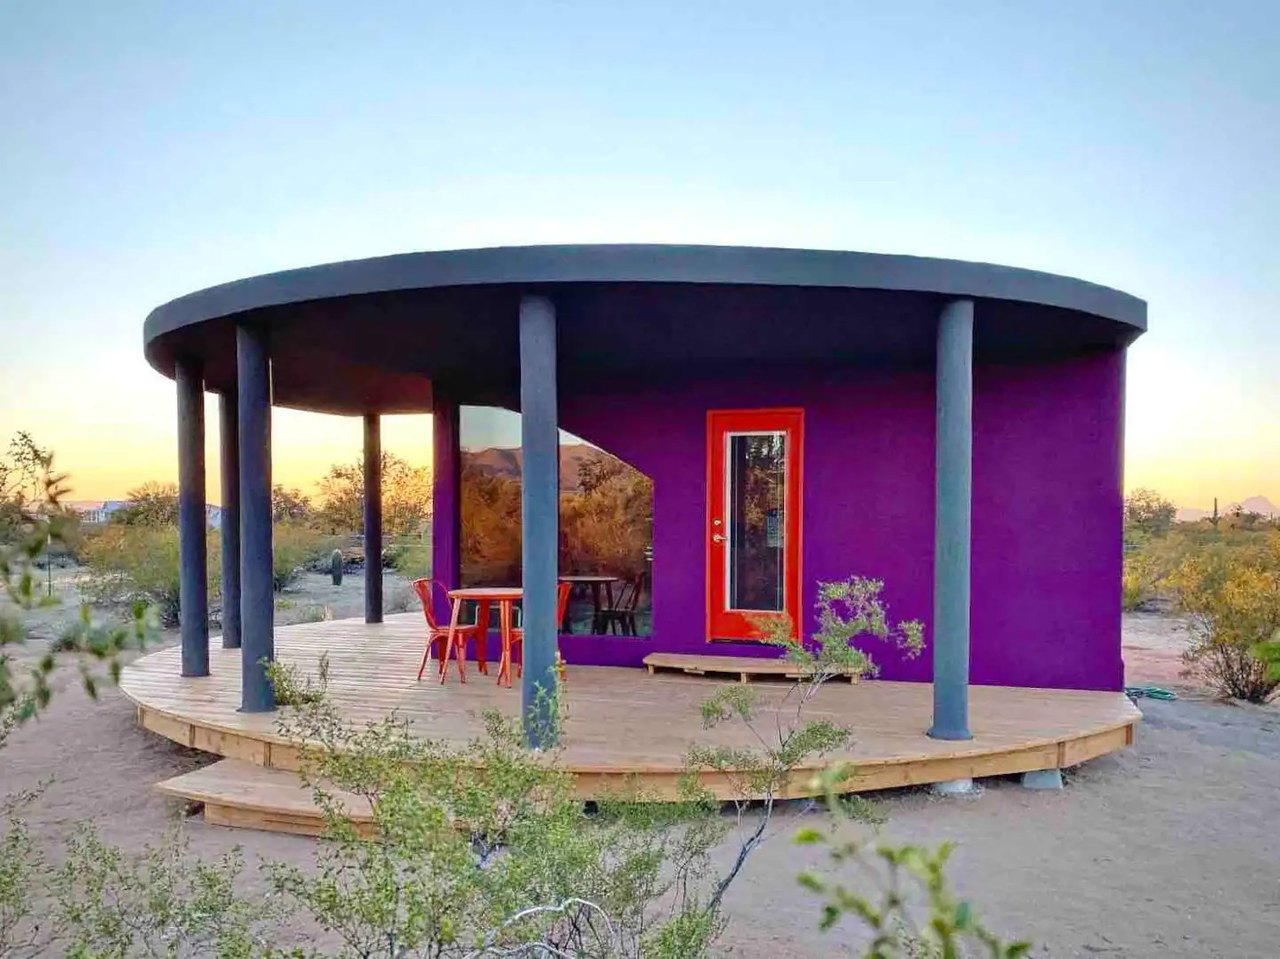 Best Places to Stay in Arizona: 10 Perfect Vacation Rentals